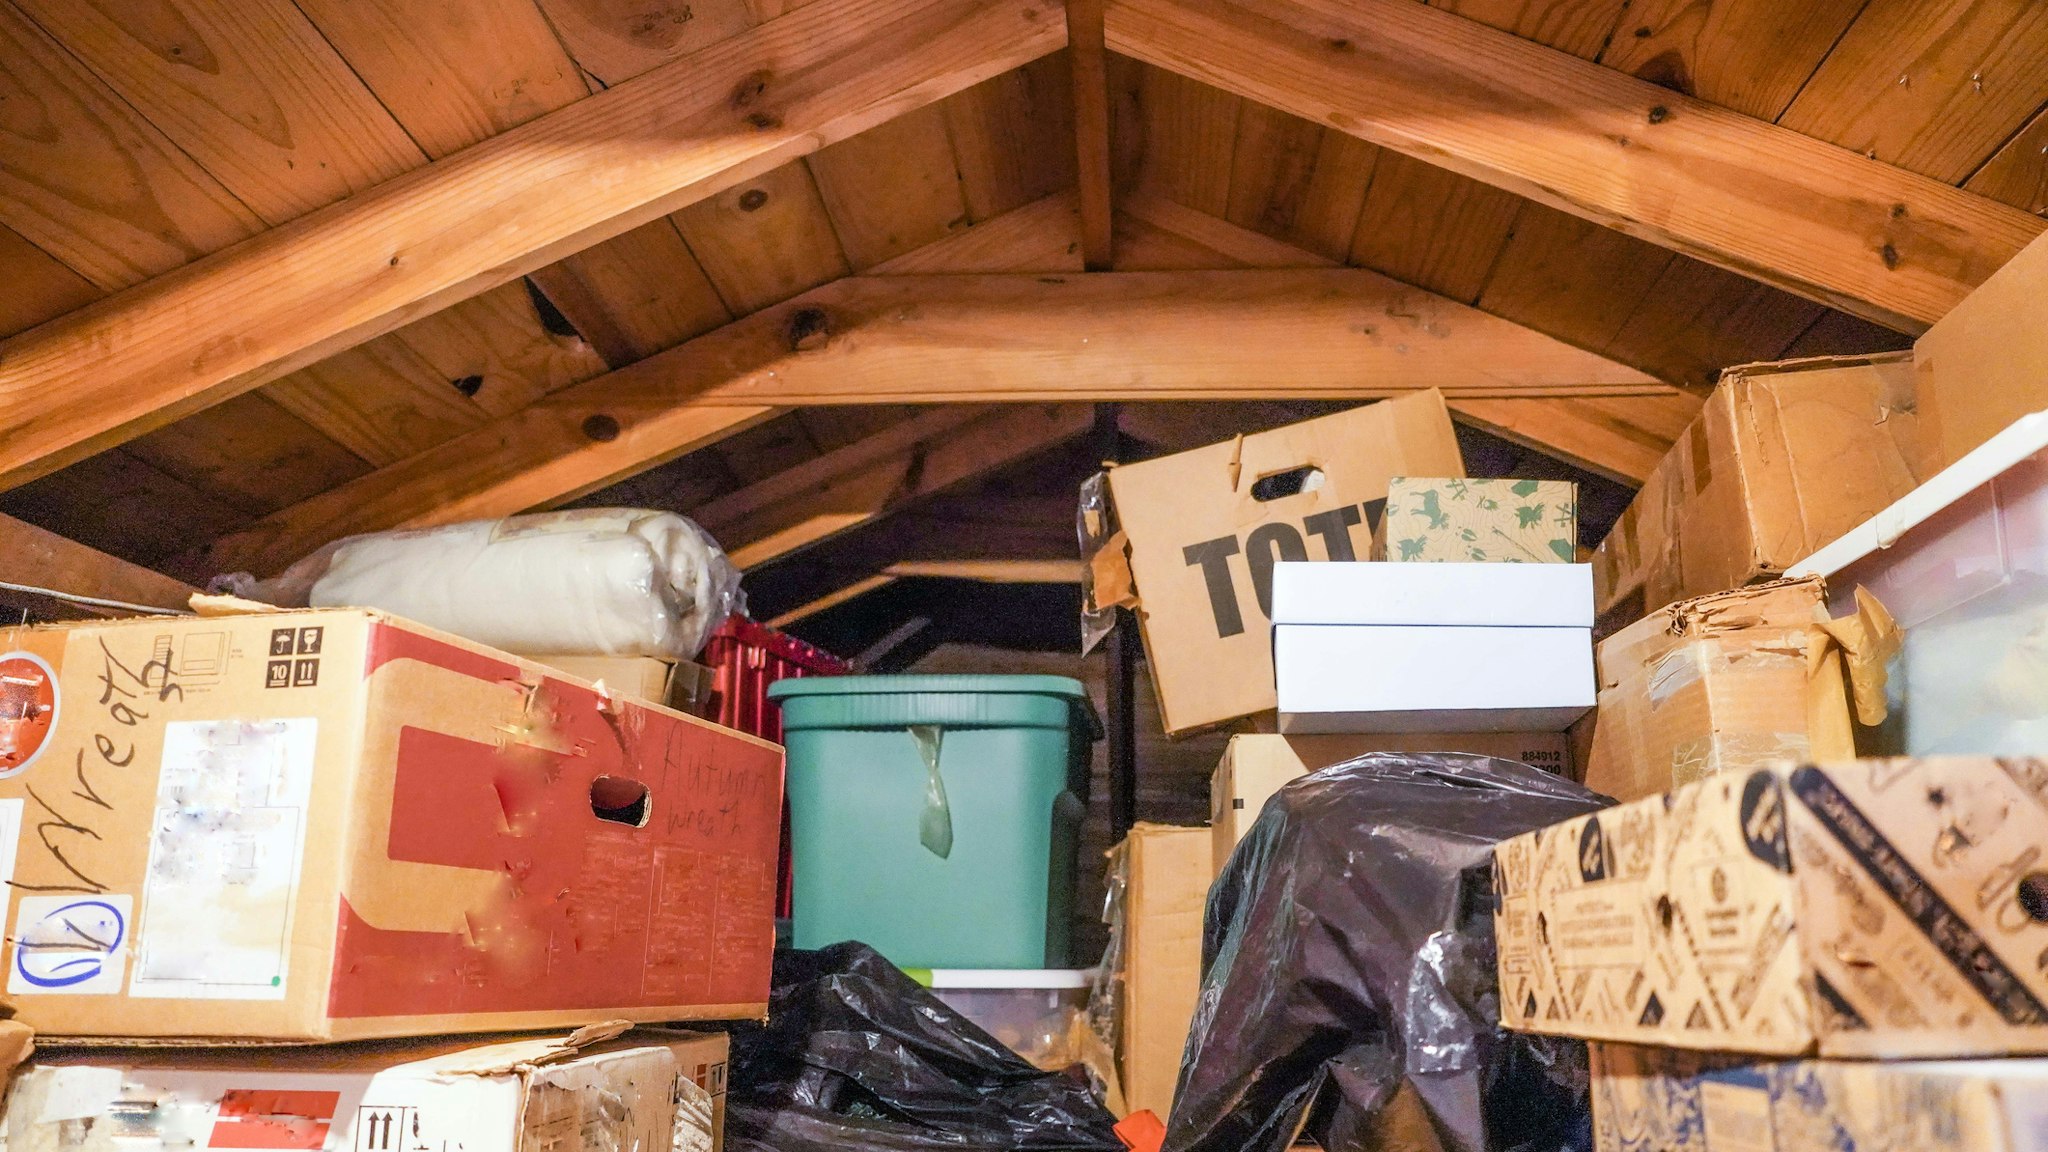 A disorganized attic. loft, or crawl-space above the residential garage.